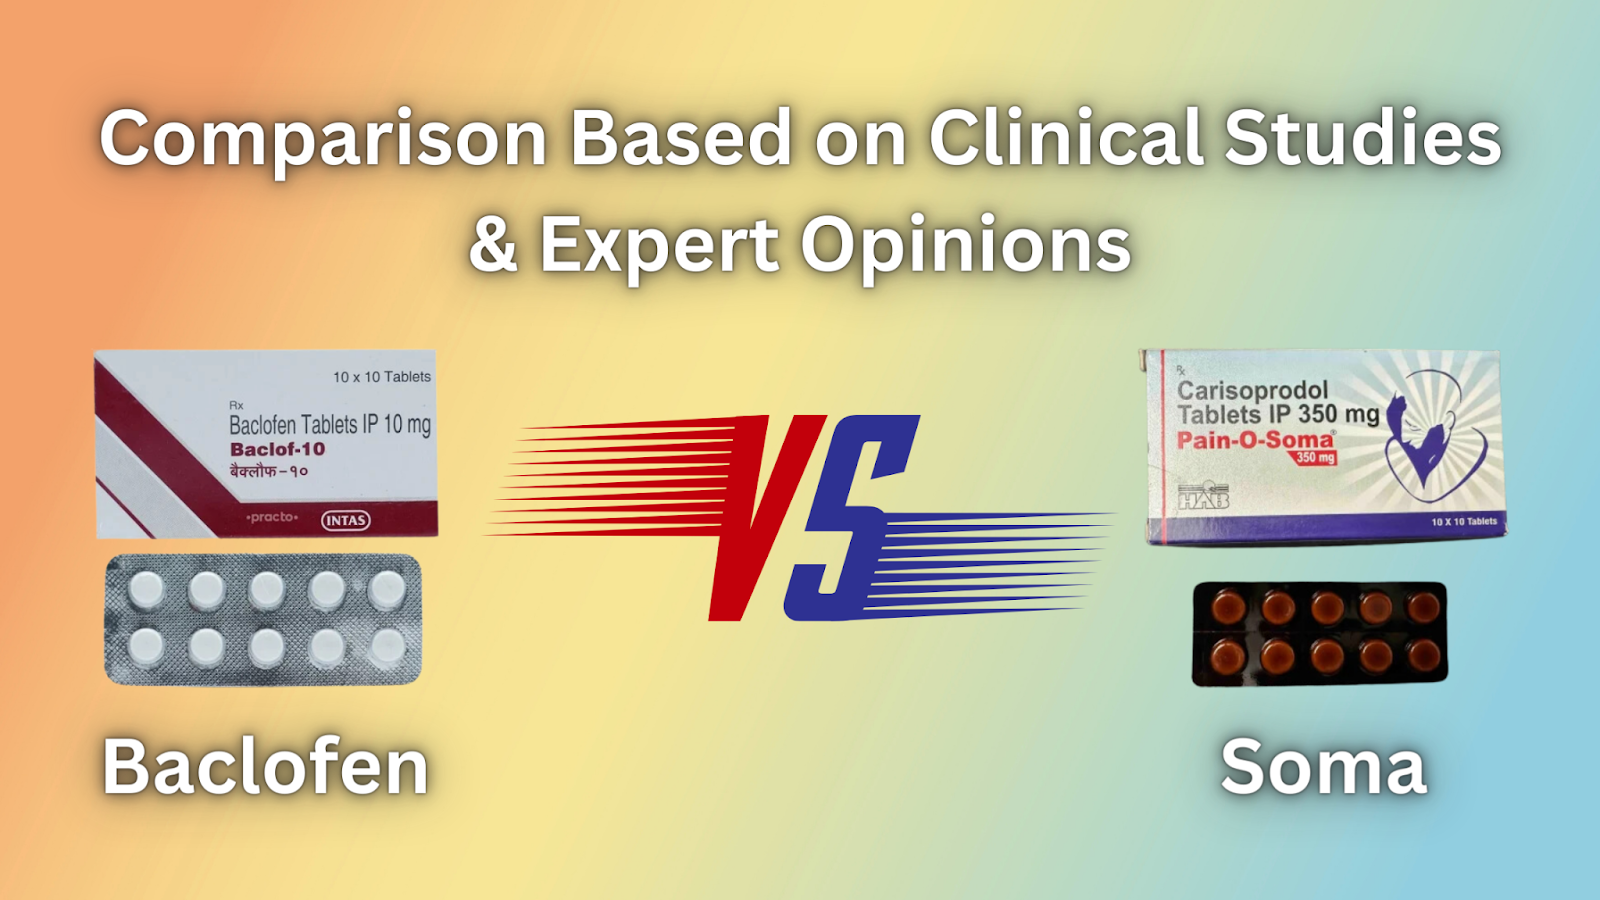 Baclofen Vs Soma: Comparison Based on Clinical Studies & Expert Opinions